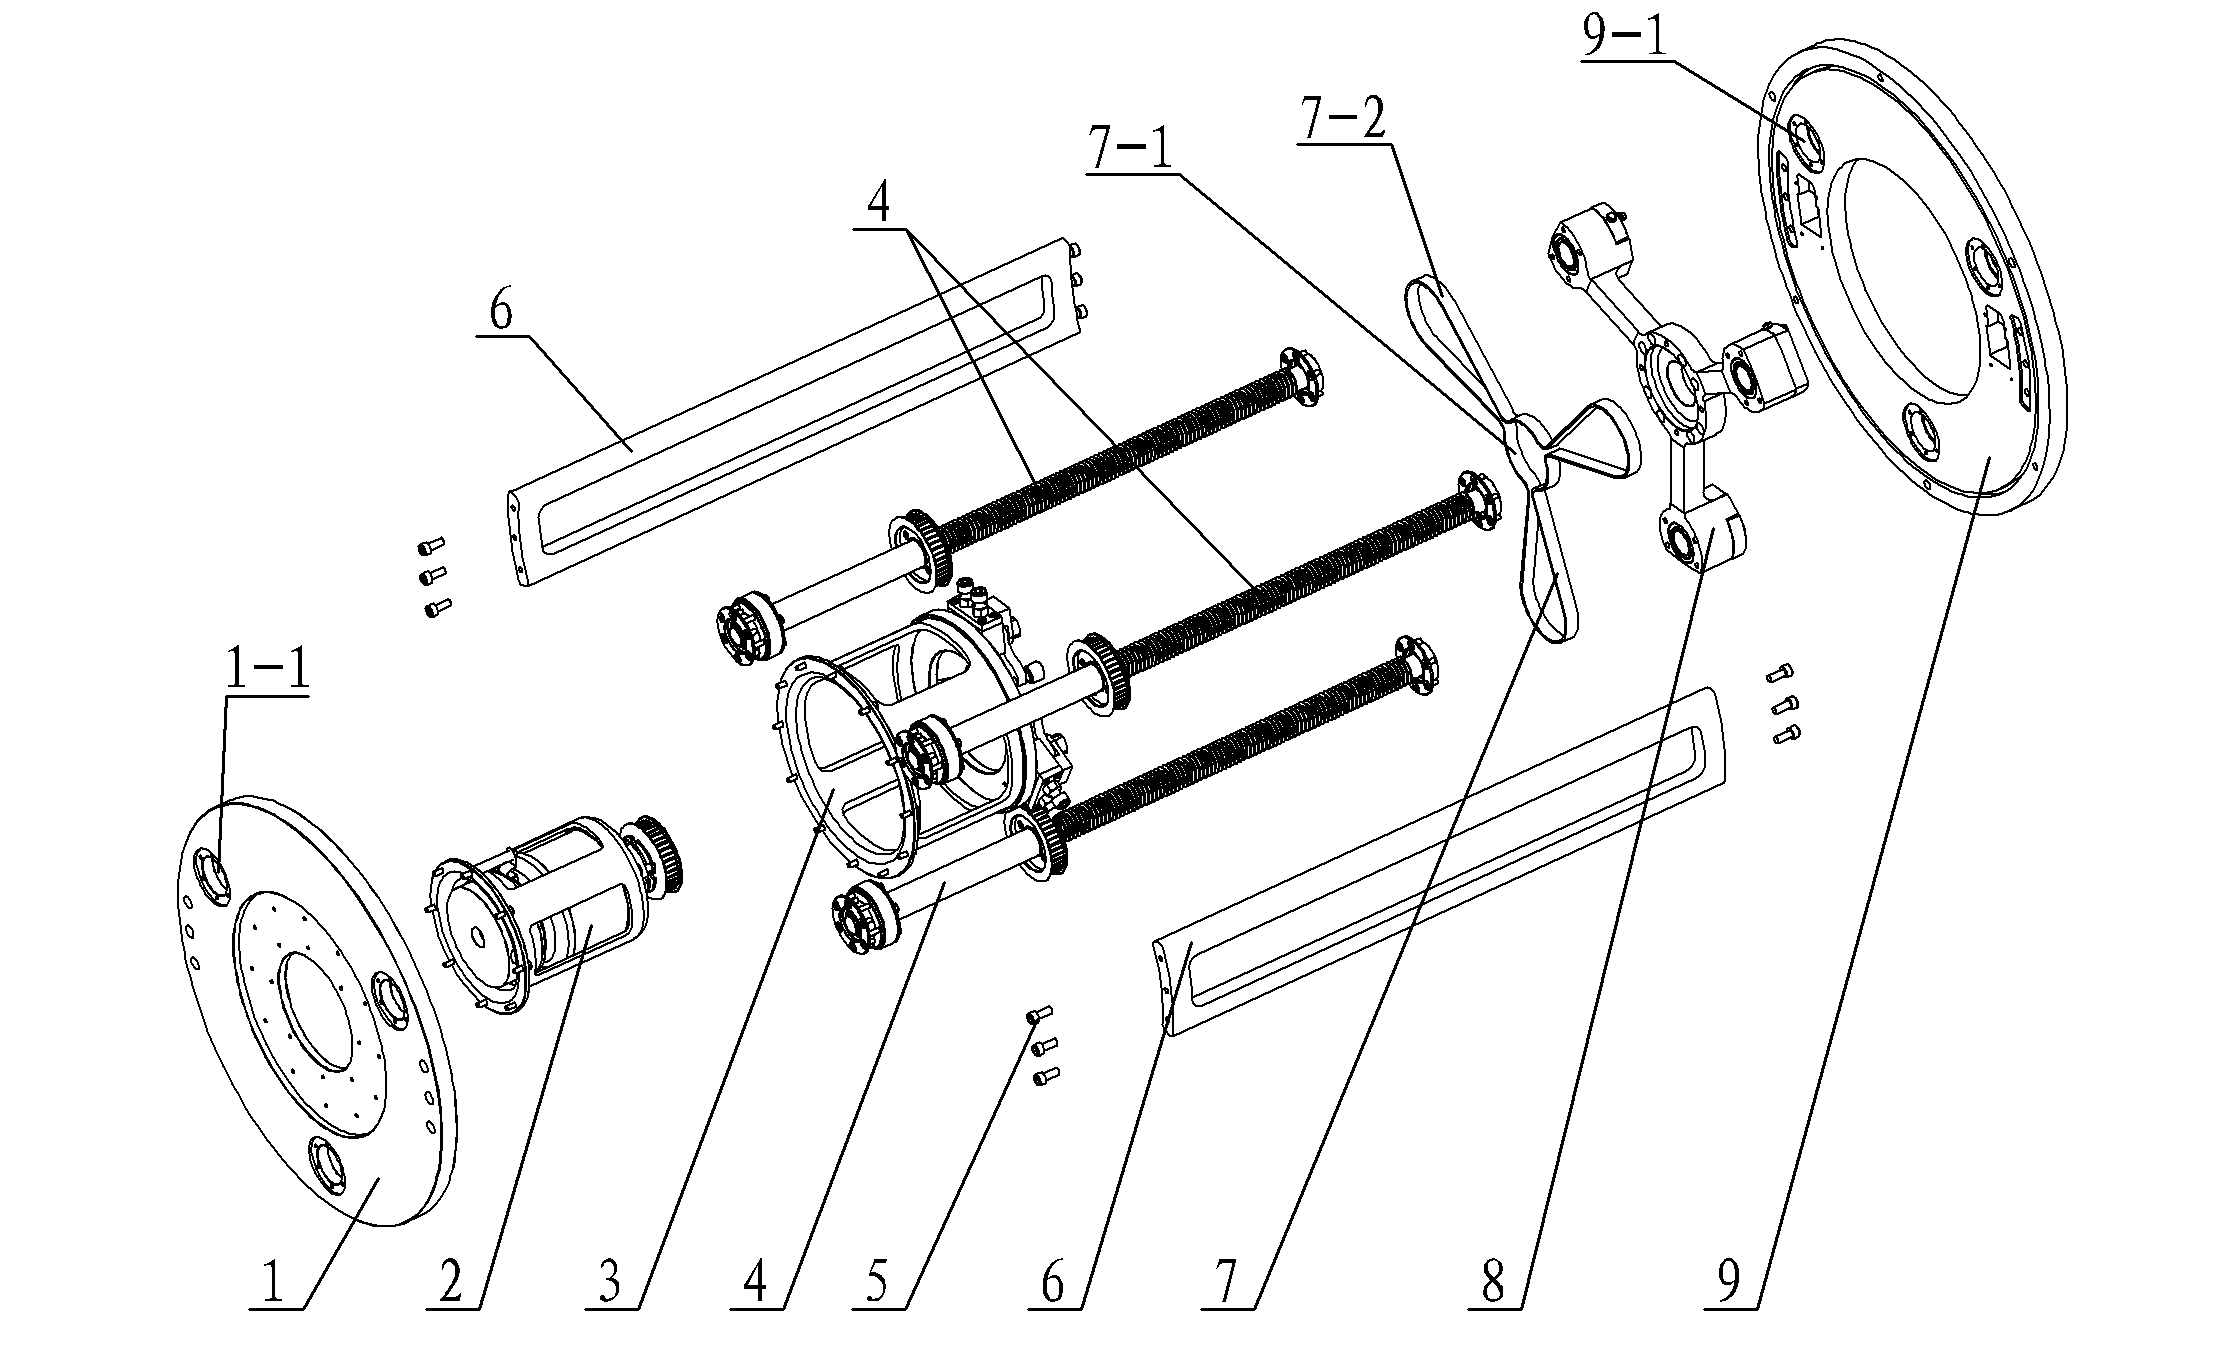 Z-axis lifting mechanism with stress state balancing function